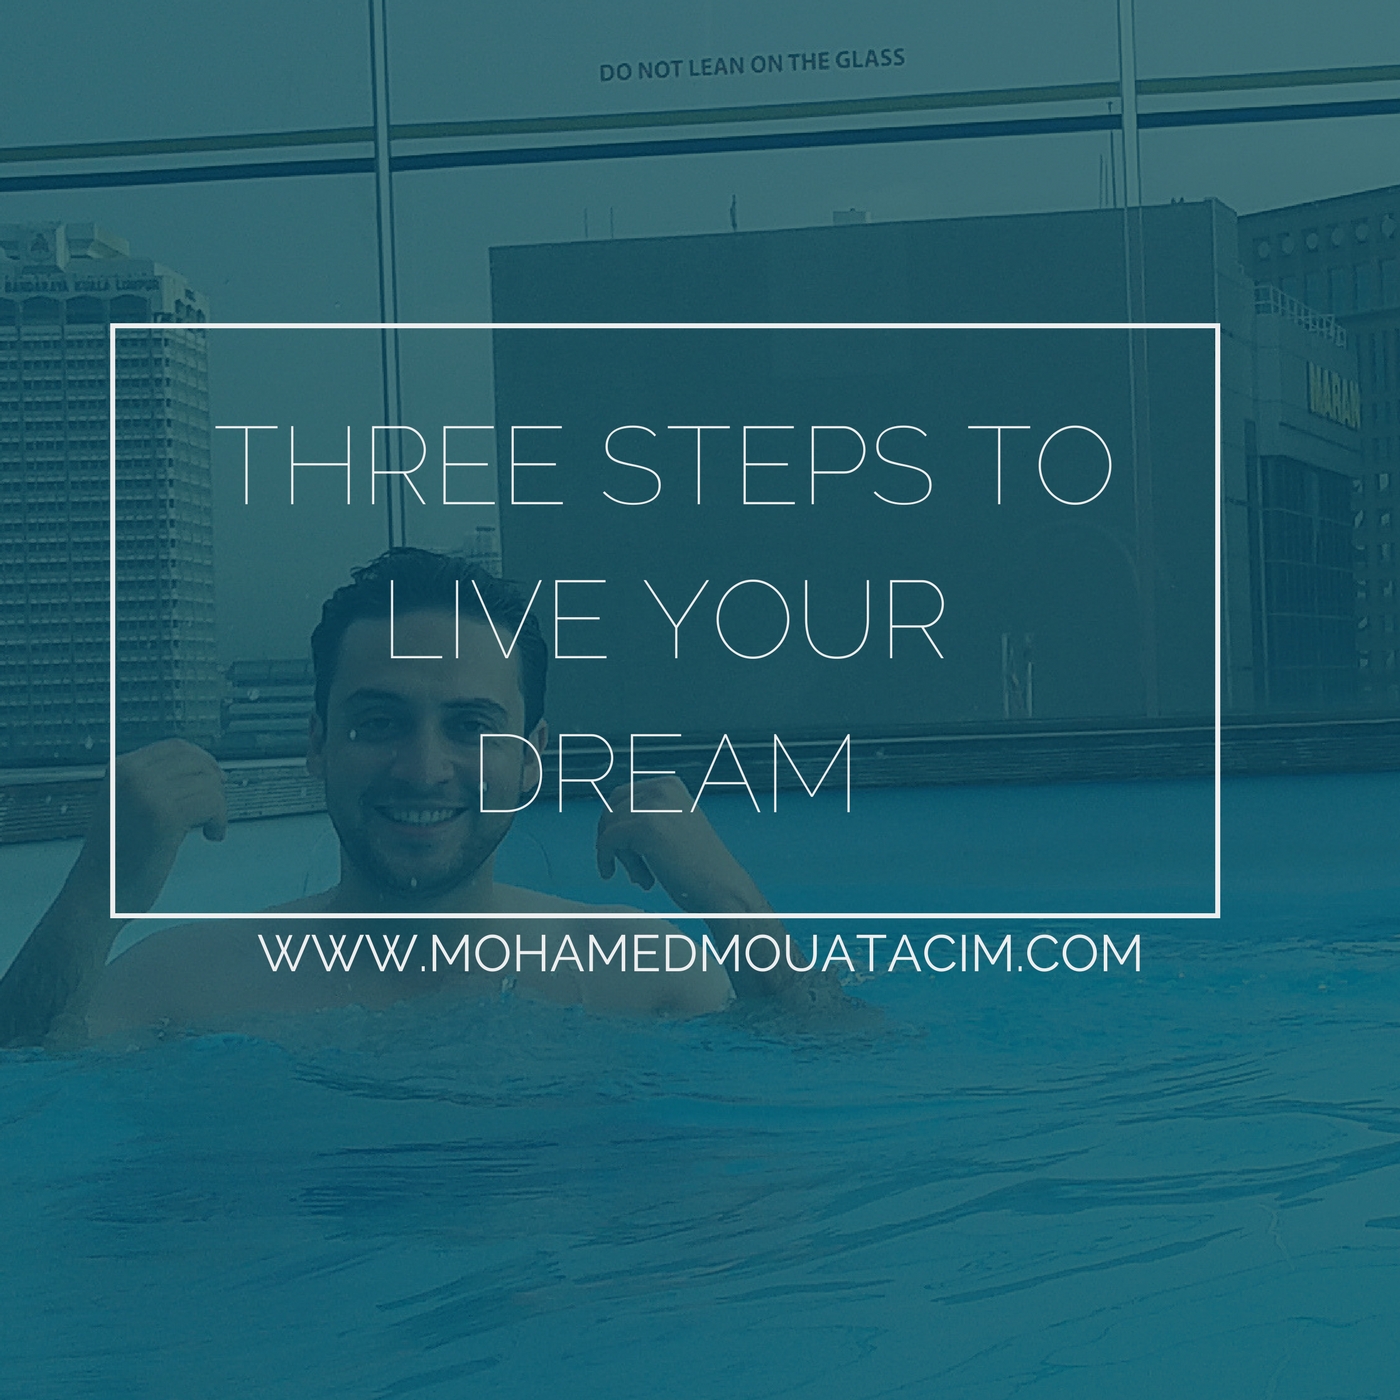 Three steps to live your dream